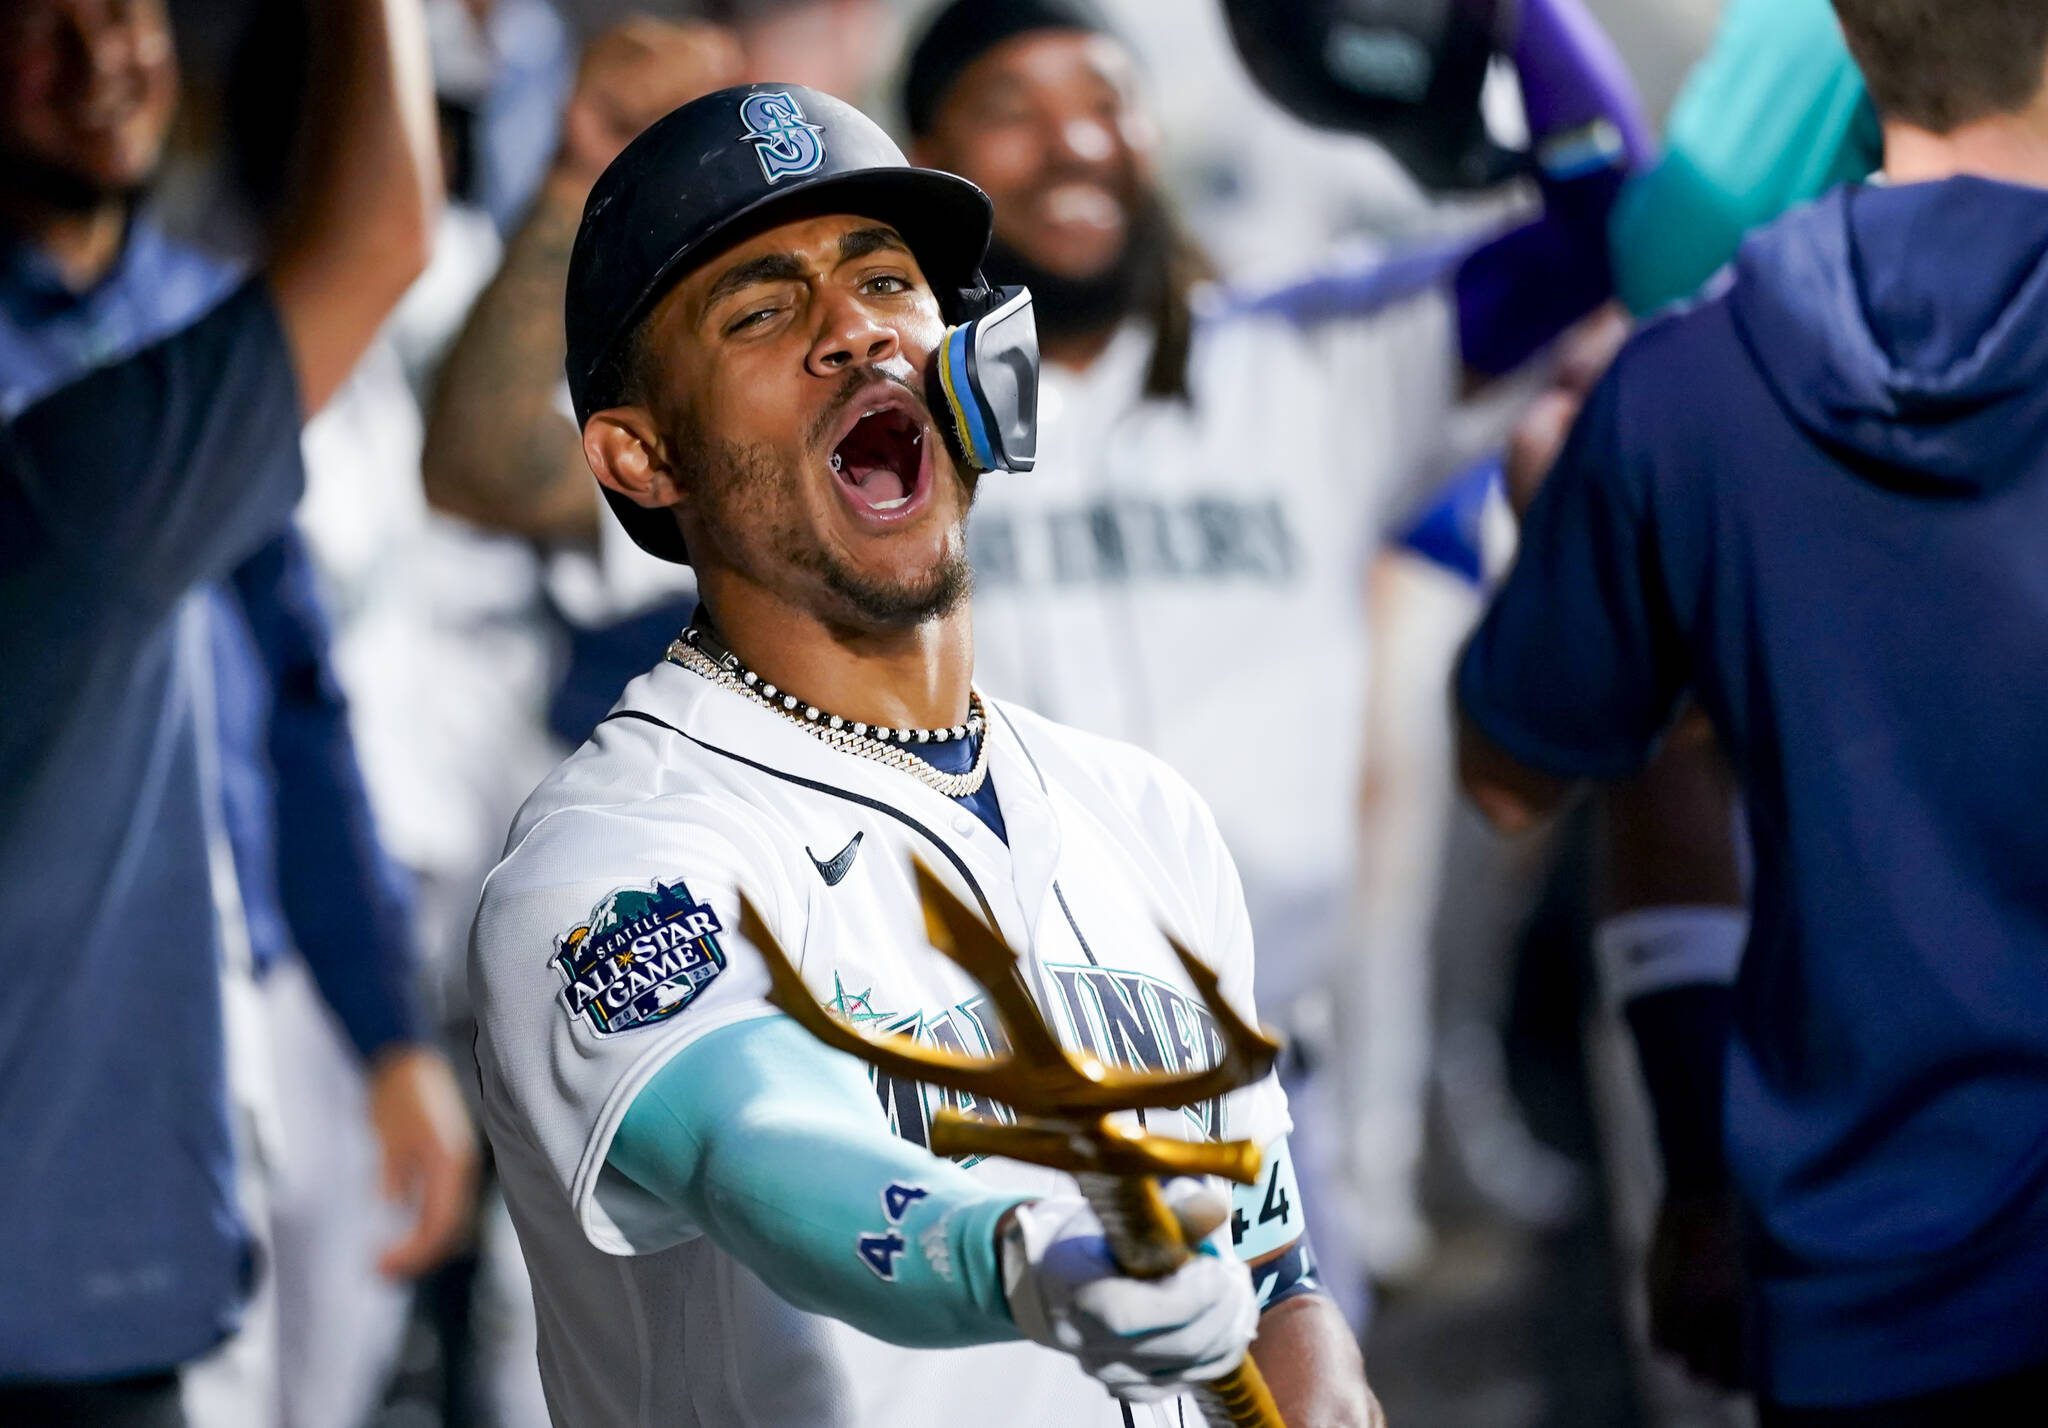 Julio, Mariners stay red-hot with win over Athletics | HeraldNet.com